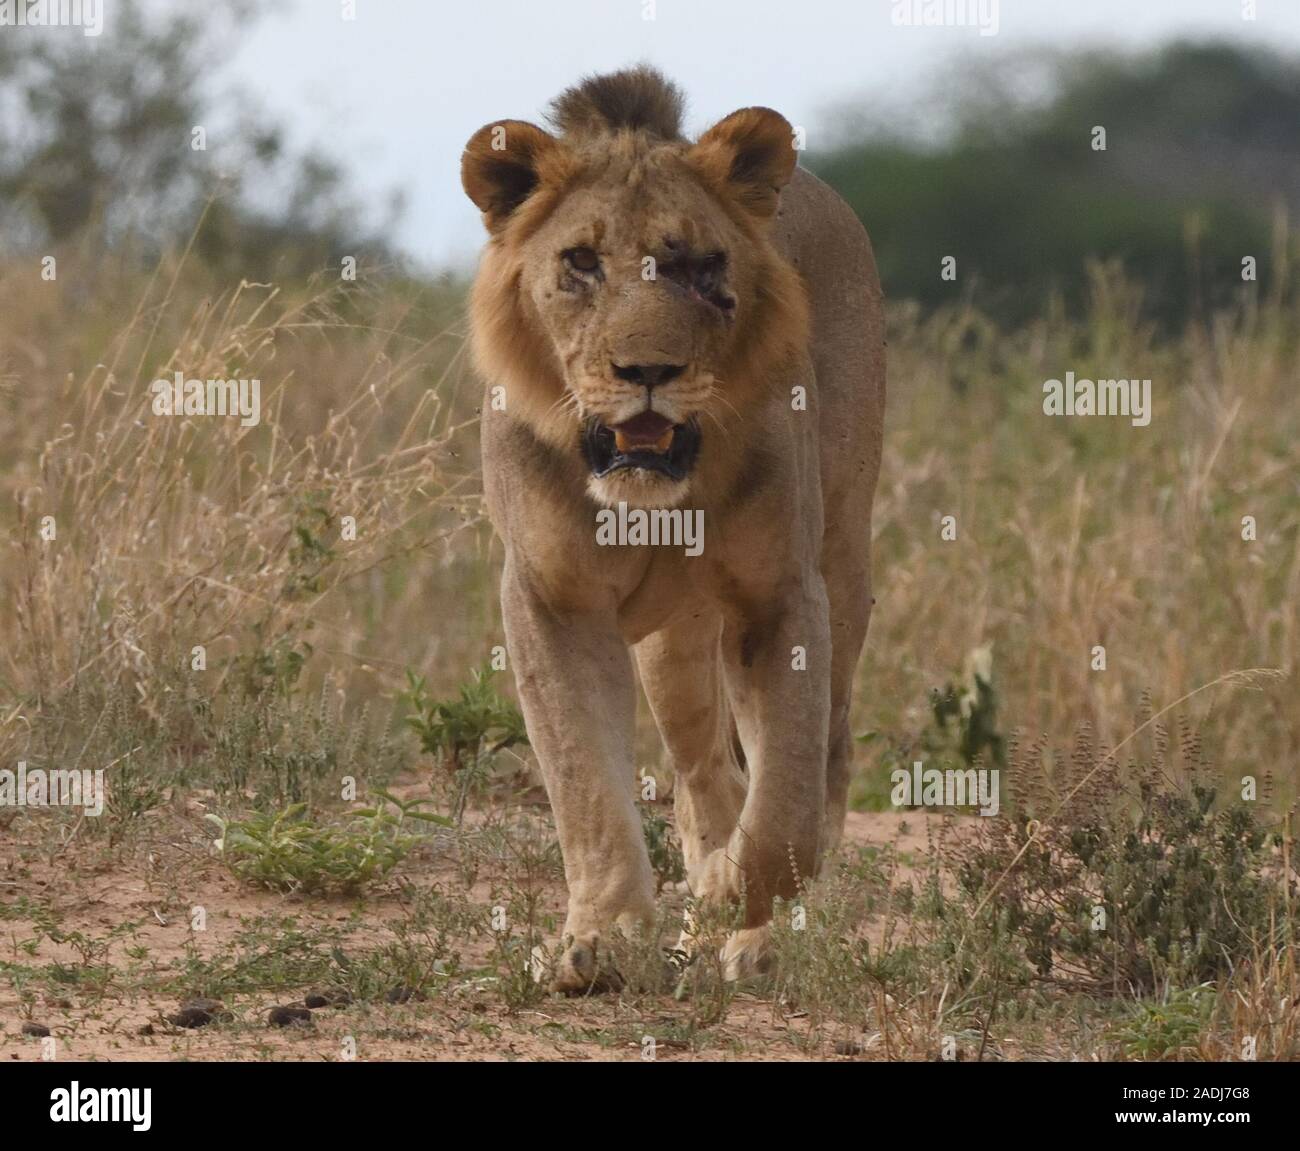 A weak and thin male  lion (Panthera leo) who appears to be missing one eye. Tarangire National Park, Tanzania. Stock Photo